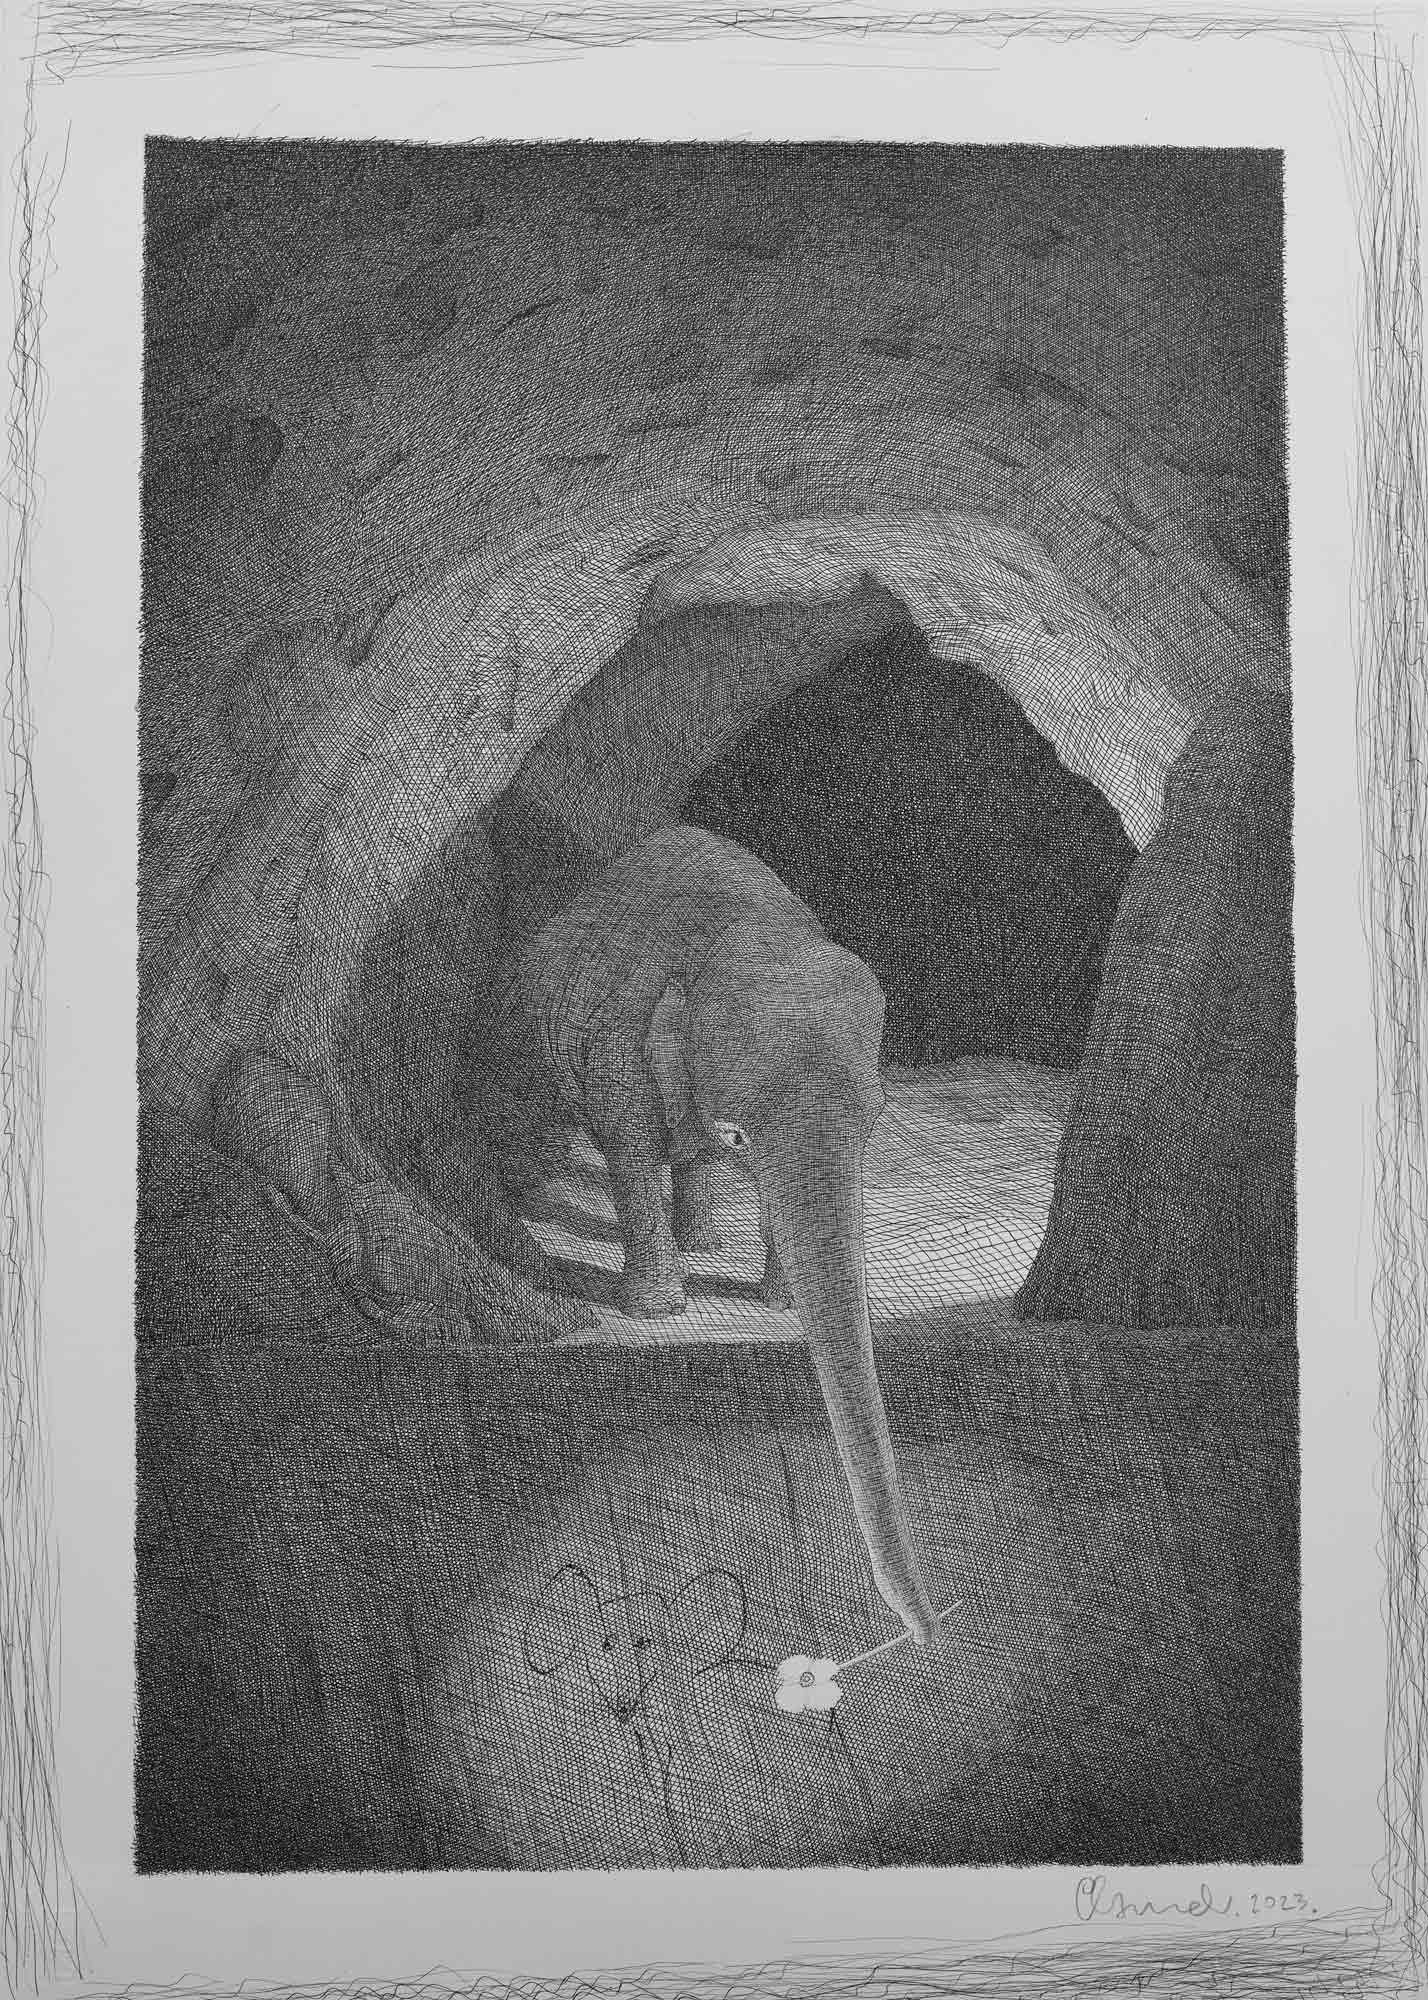 Pen and ink by Mark Alexander: Elephant with flower in trunk leans over cave edge, reaching for sketched mouse.